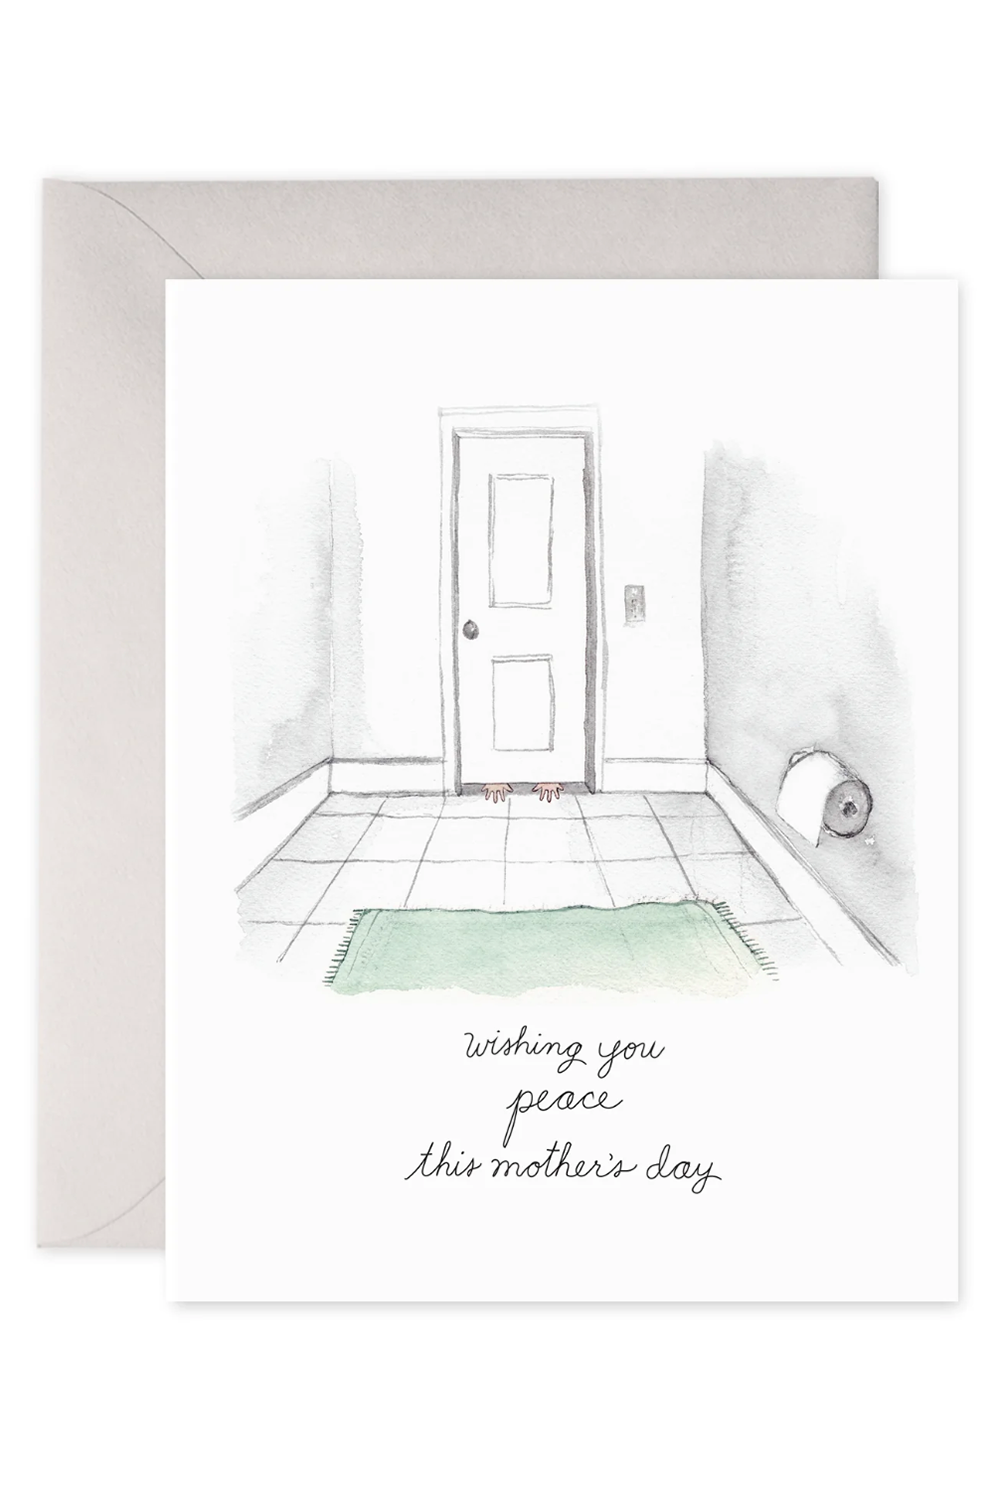 EFran Mother's Day Greeting Card - Bathroom Peace